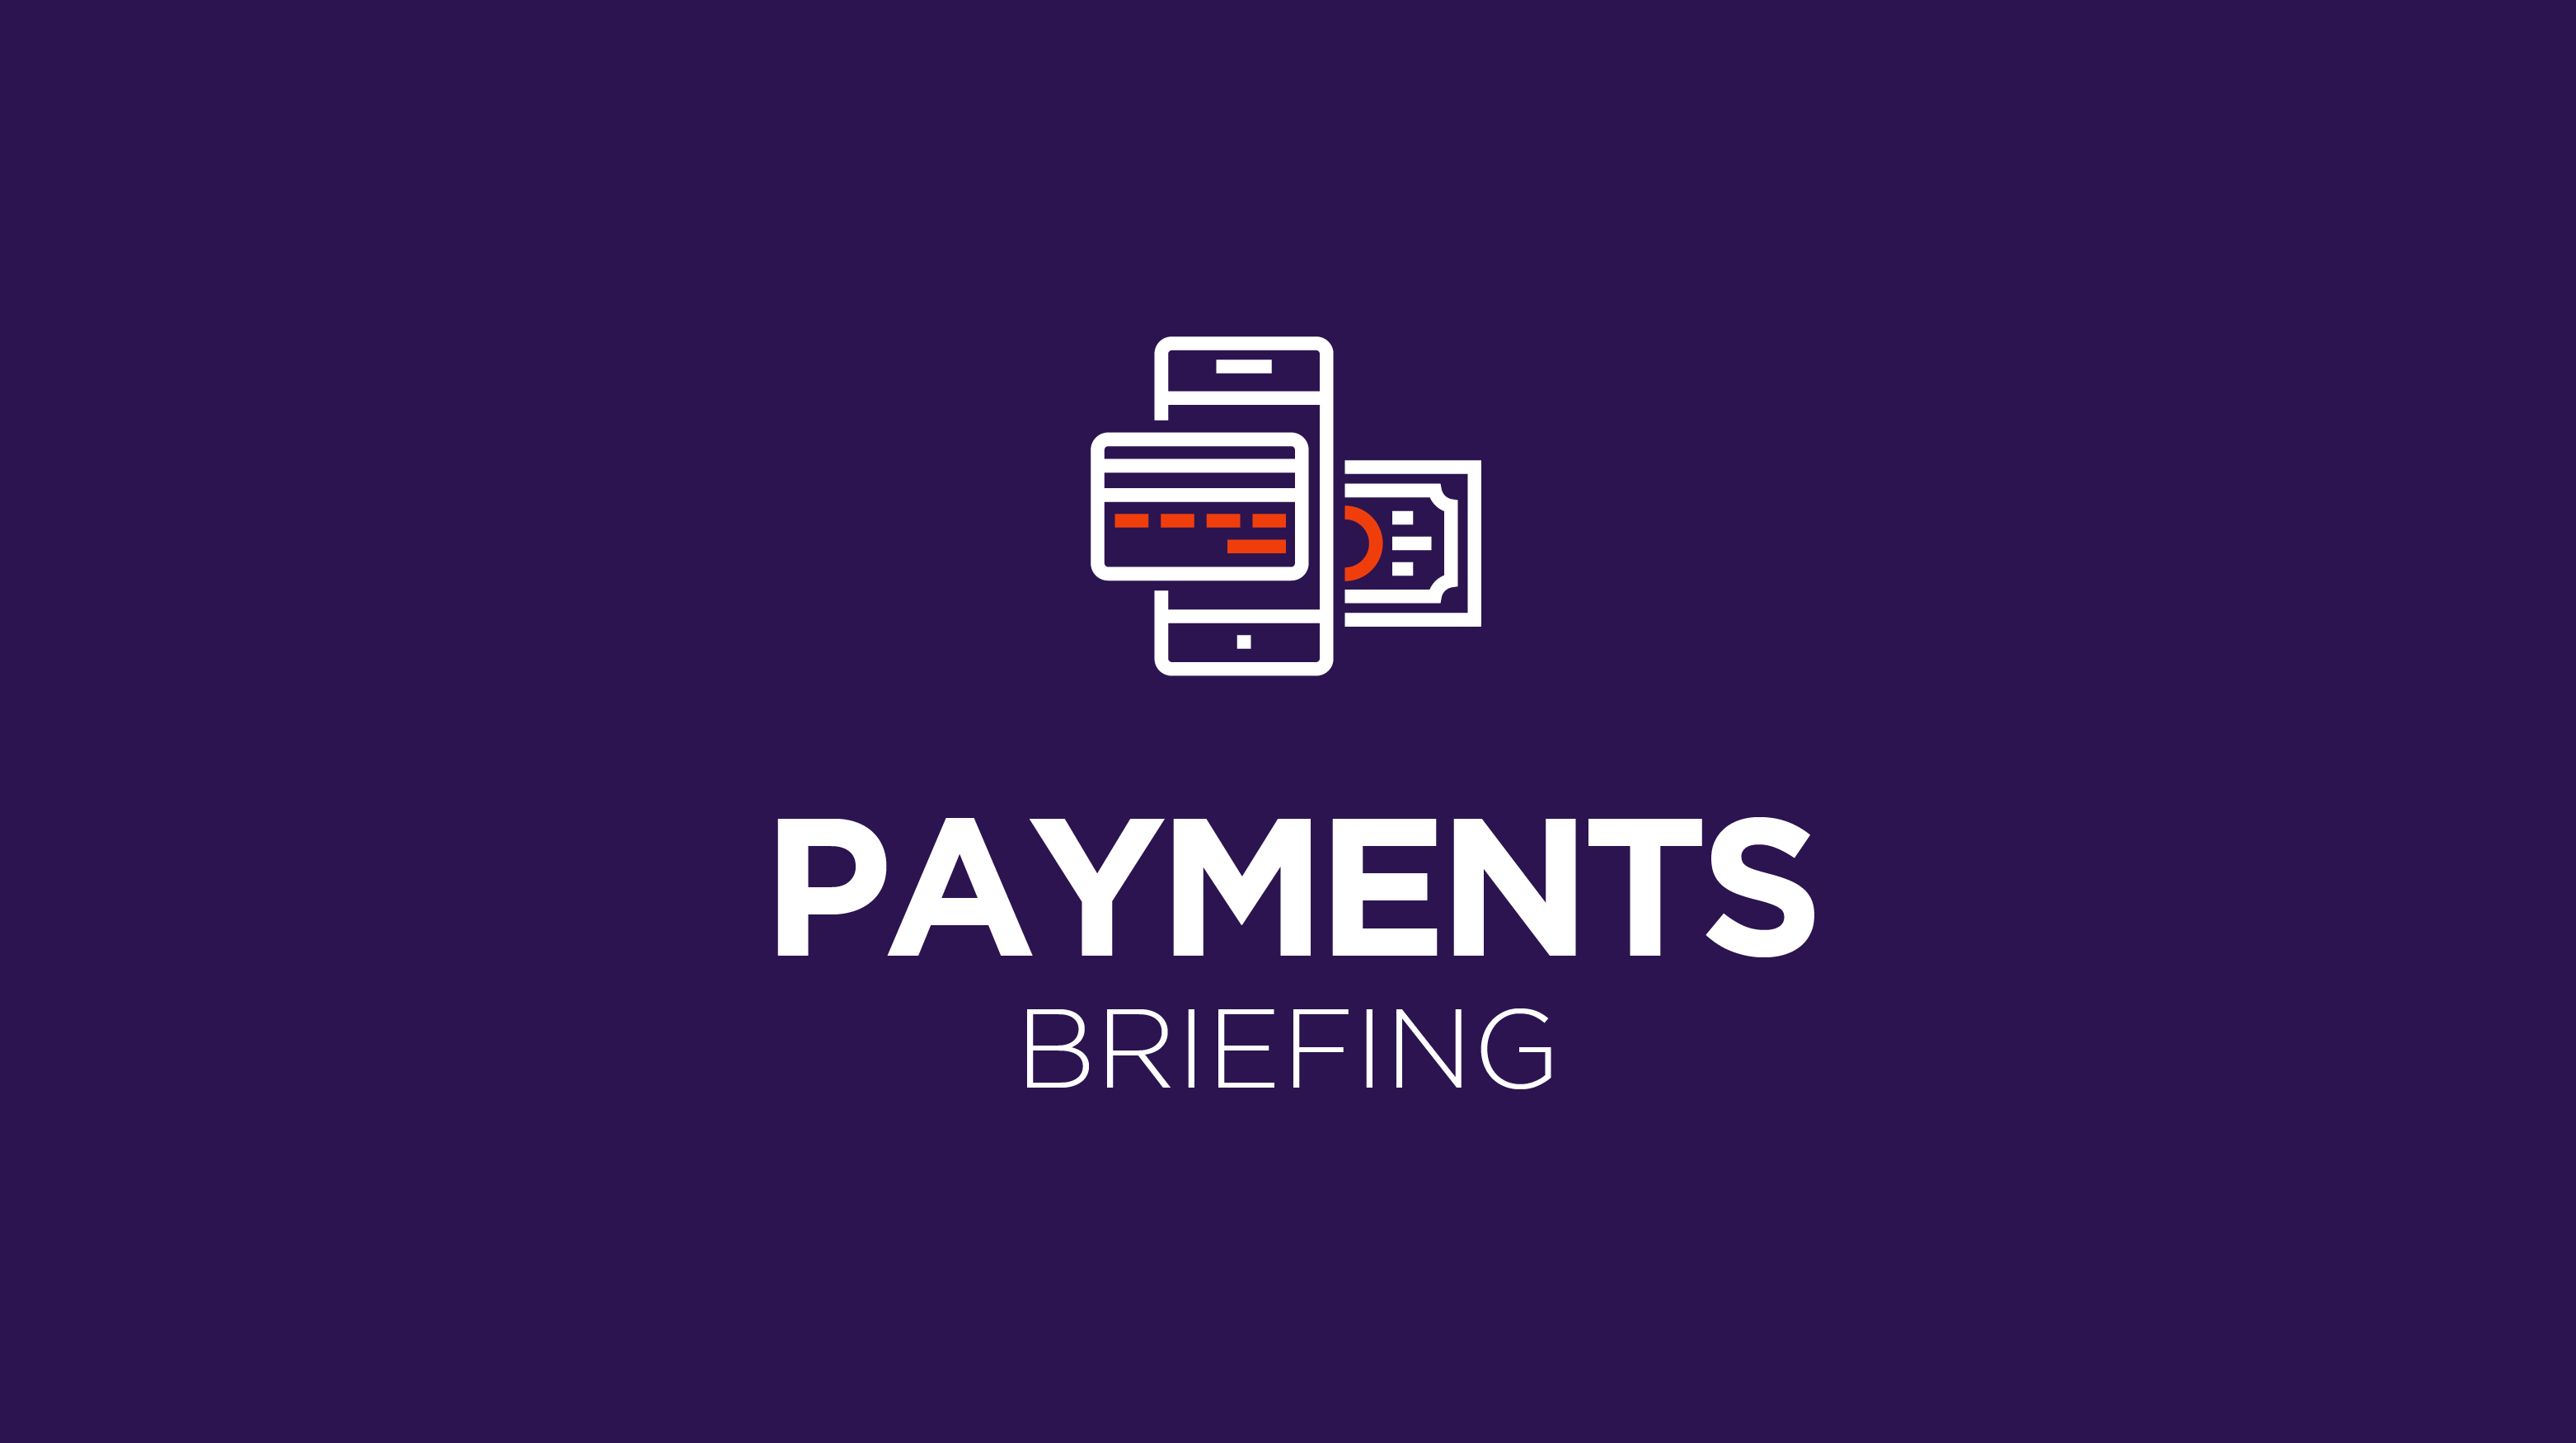 Payments Briefing: On Gen Z’s changing relationship with digital payments